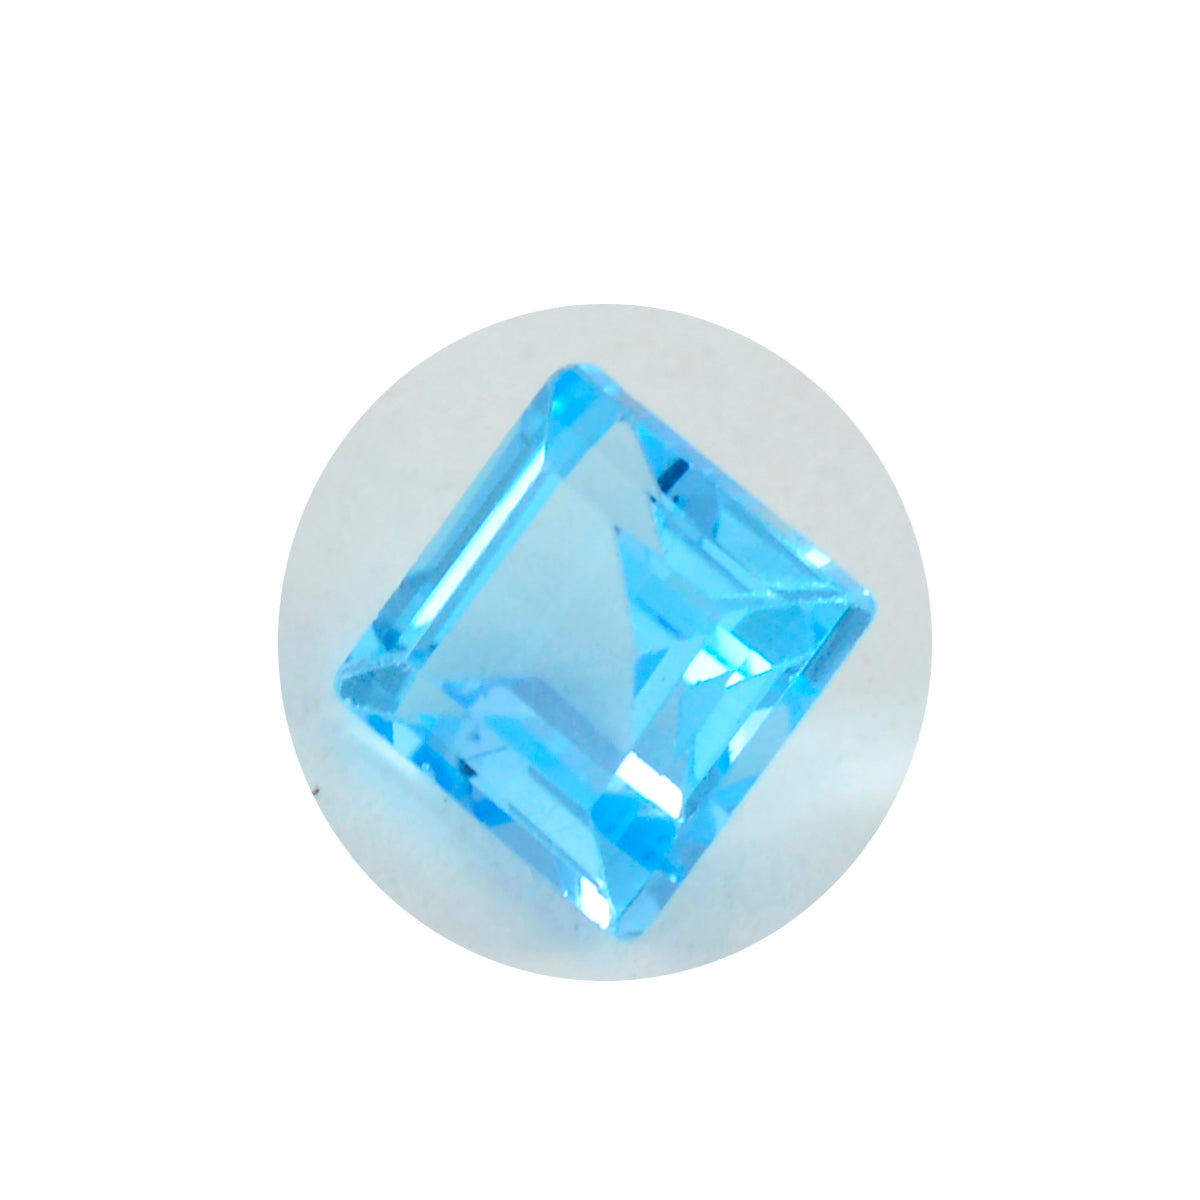 Riyogems 1PC Natural Blue Topaz Faceted 11x11 mm Square Shape good-looking Quality Loose Gemstone